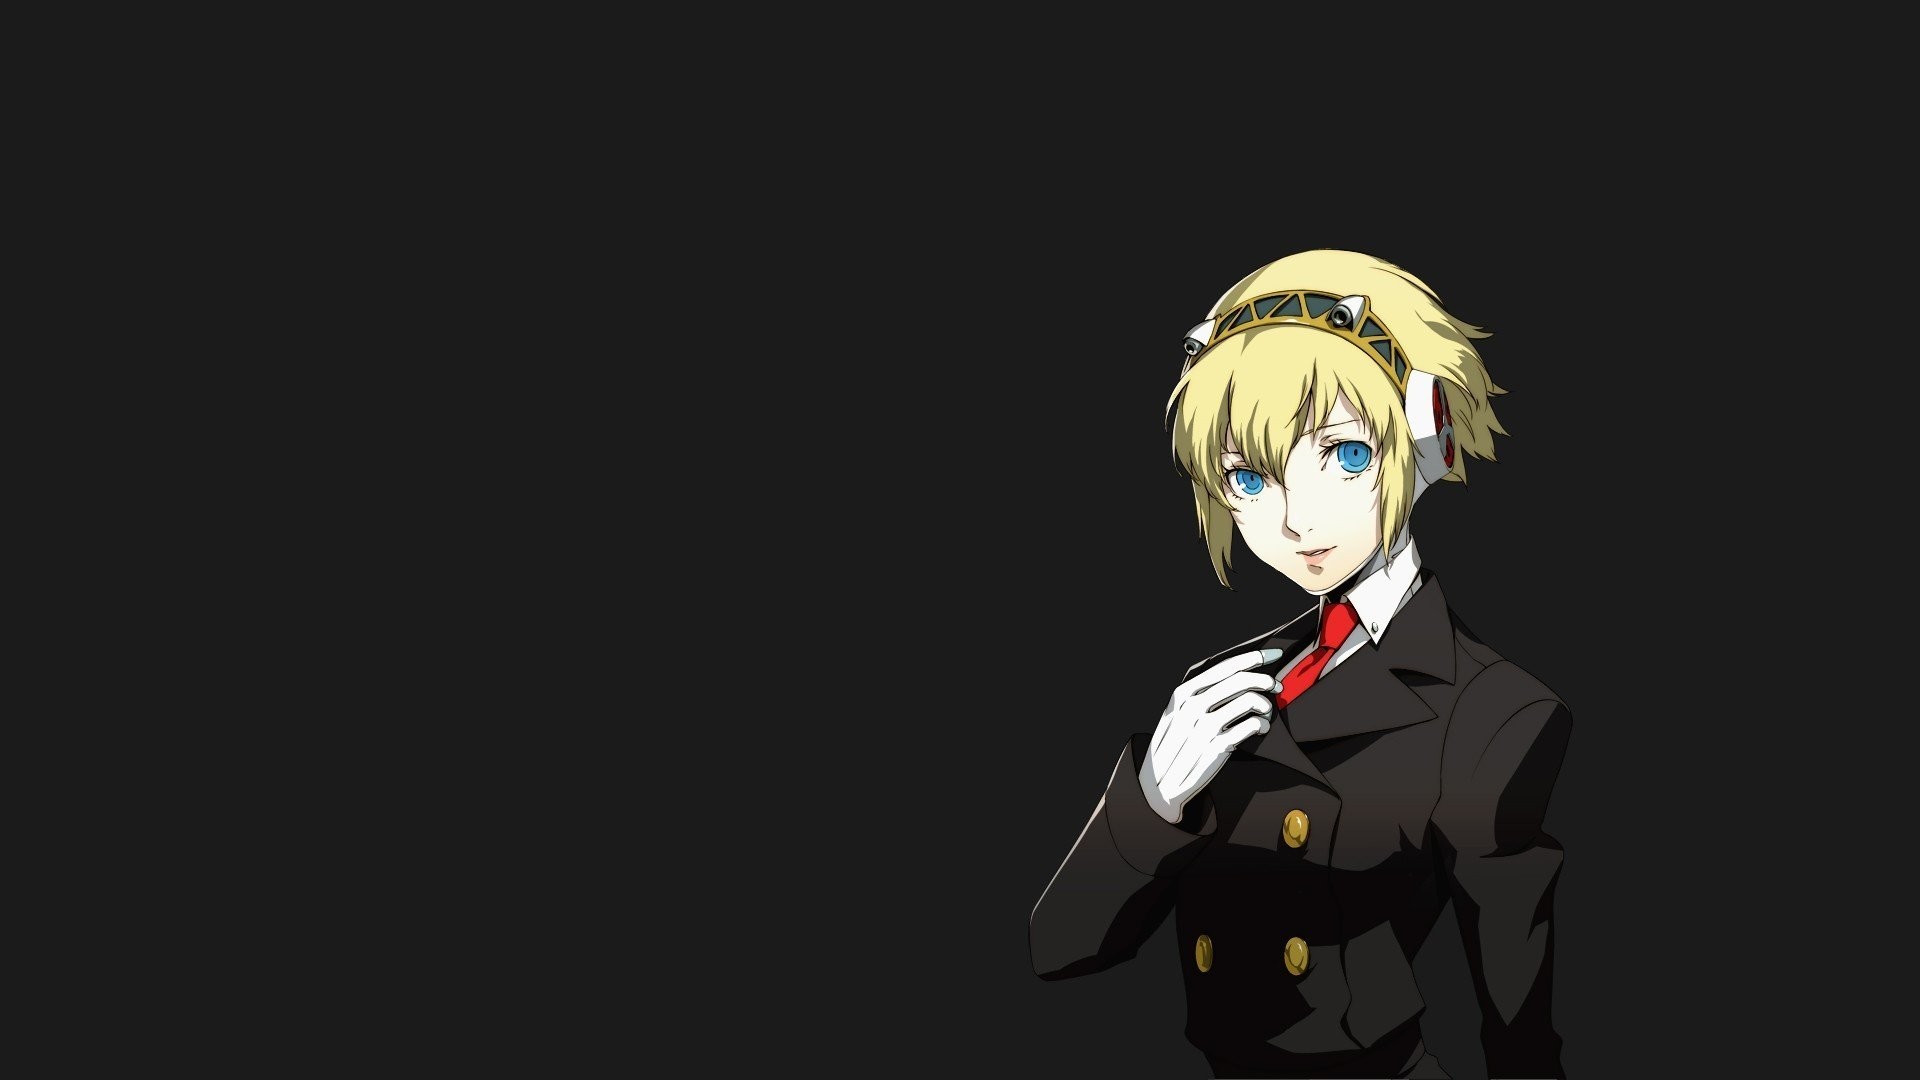 4 Persona 4 Arena Wallpapers Wallpaper Abyss Computer